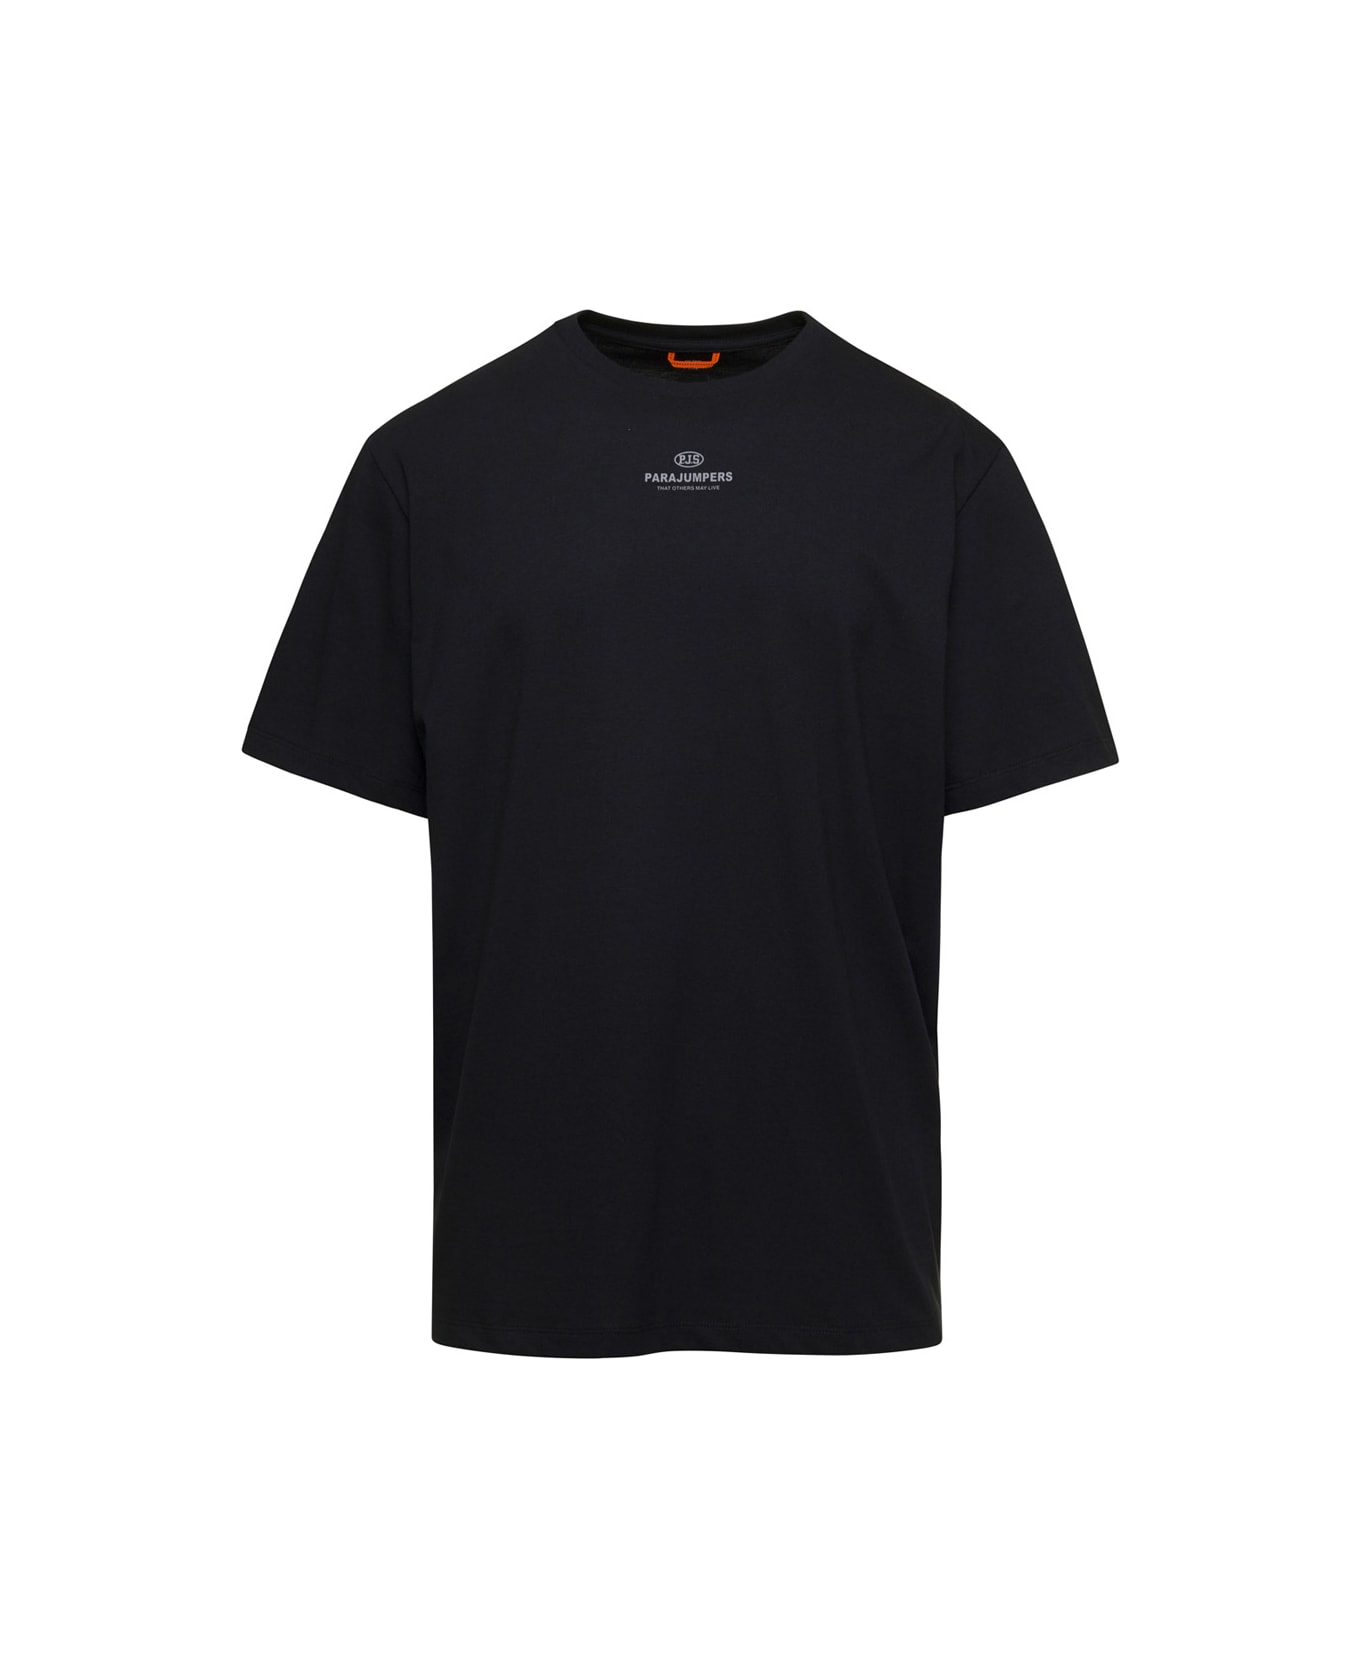 Parajumpers Black Crewneck T-shirt With Contrasting Logo Print In Cotton Man - Black シャツ